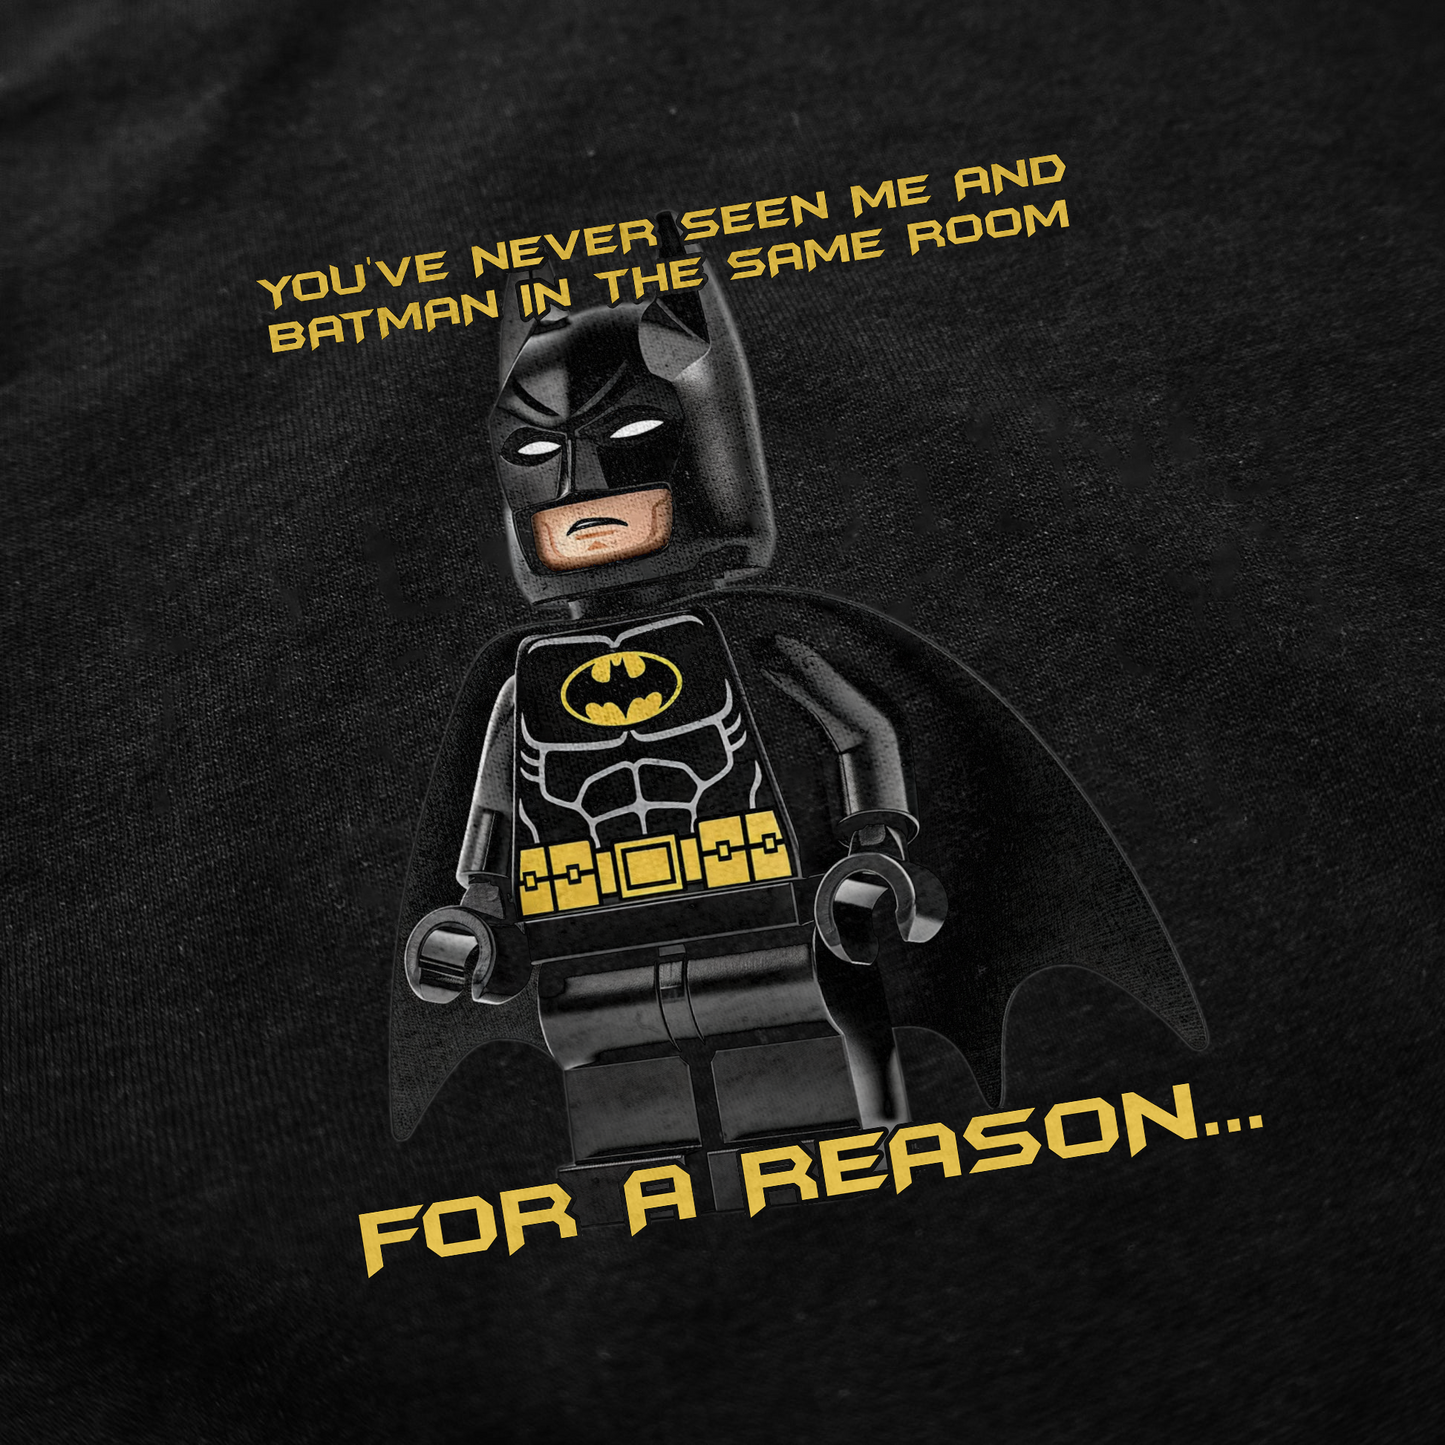 You've Never Seen Me And Batman In The Same Room For A Reason... T-Shirt